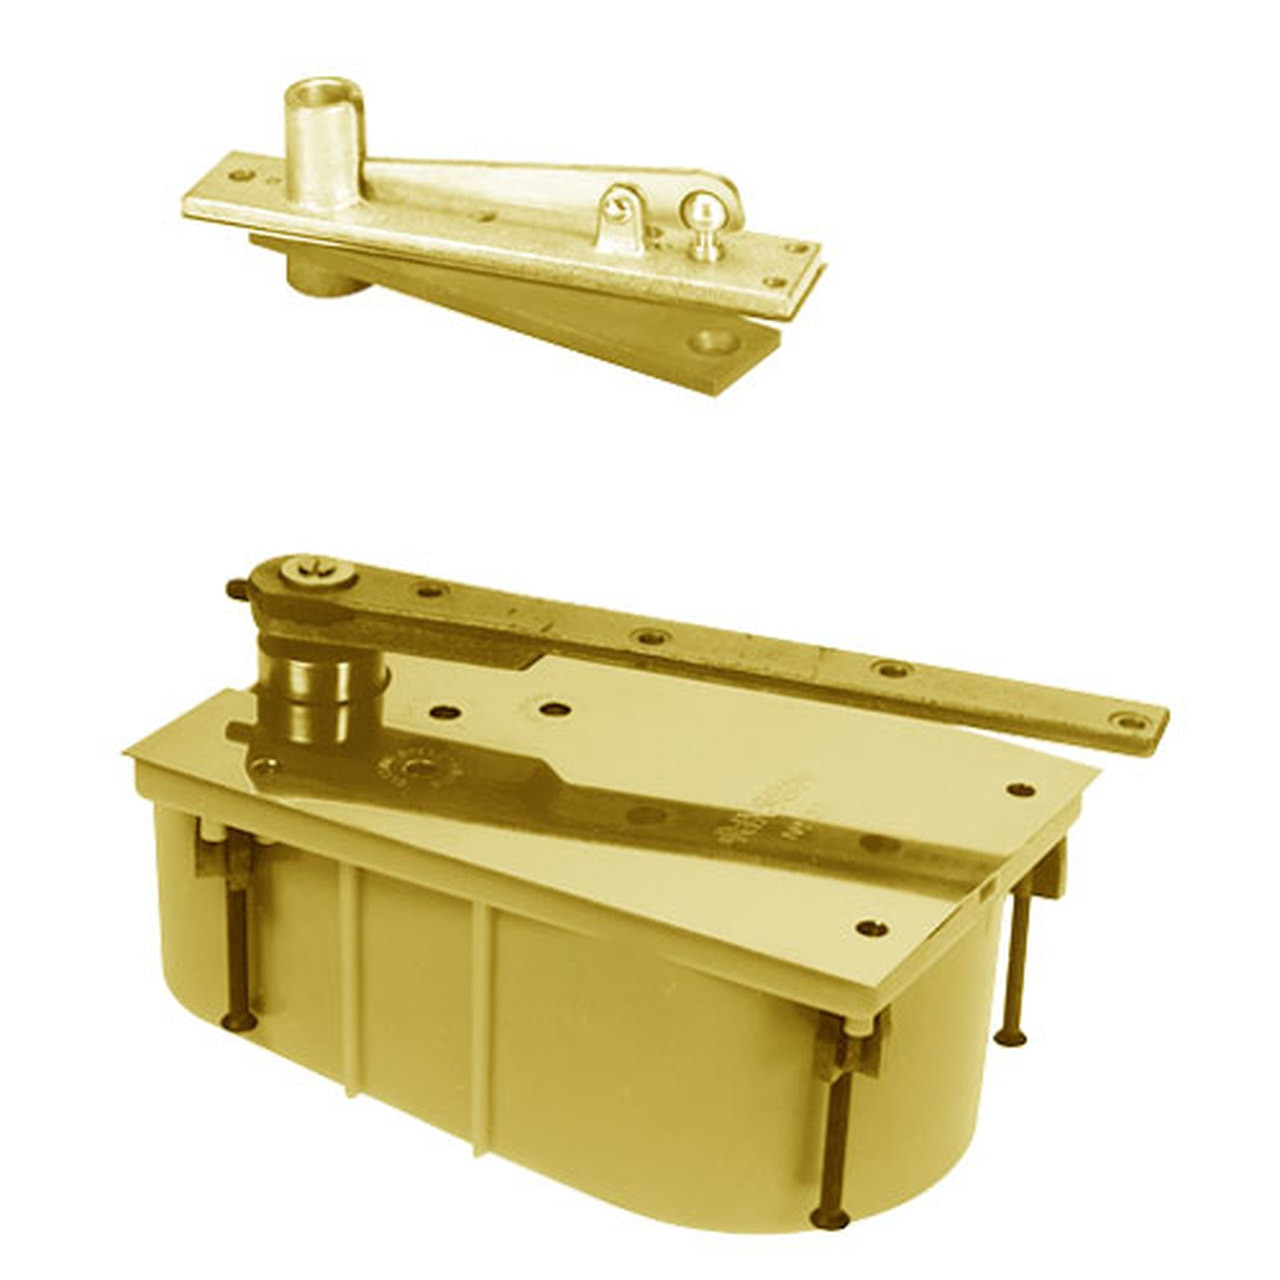 28-90S-554-LFP-LCC-RH-605 Rixson 28 Series Heavy Duty Single Acting Center Hung Floor Closer with Concealed Arm in Bright Brass Finish